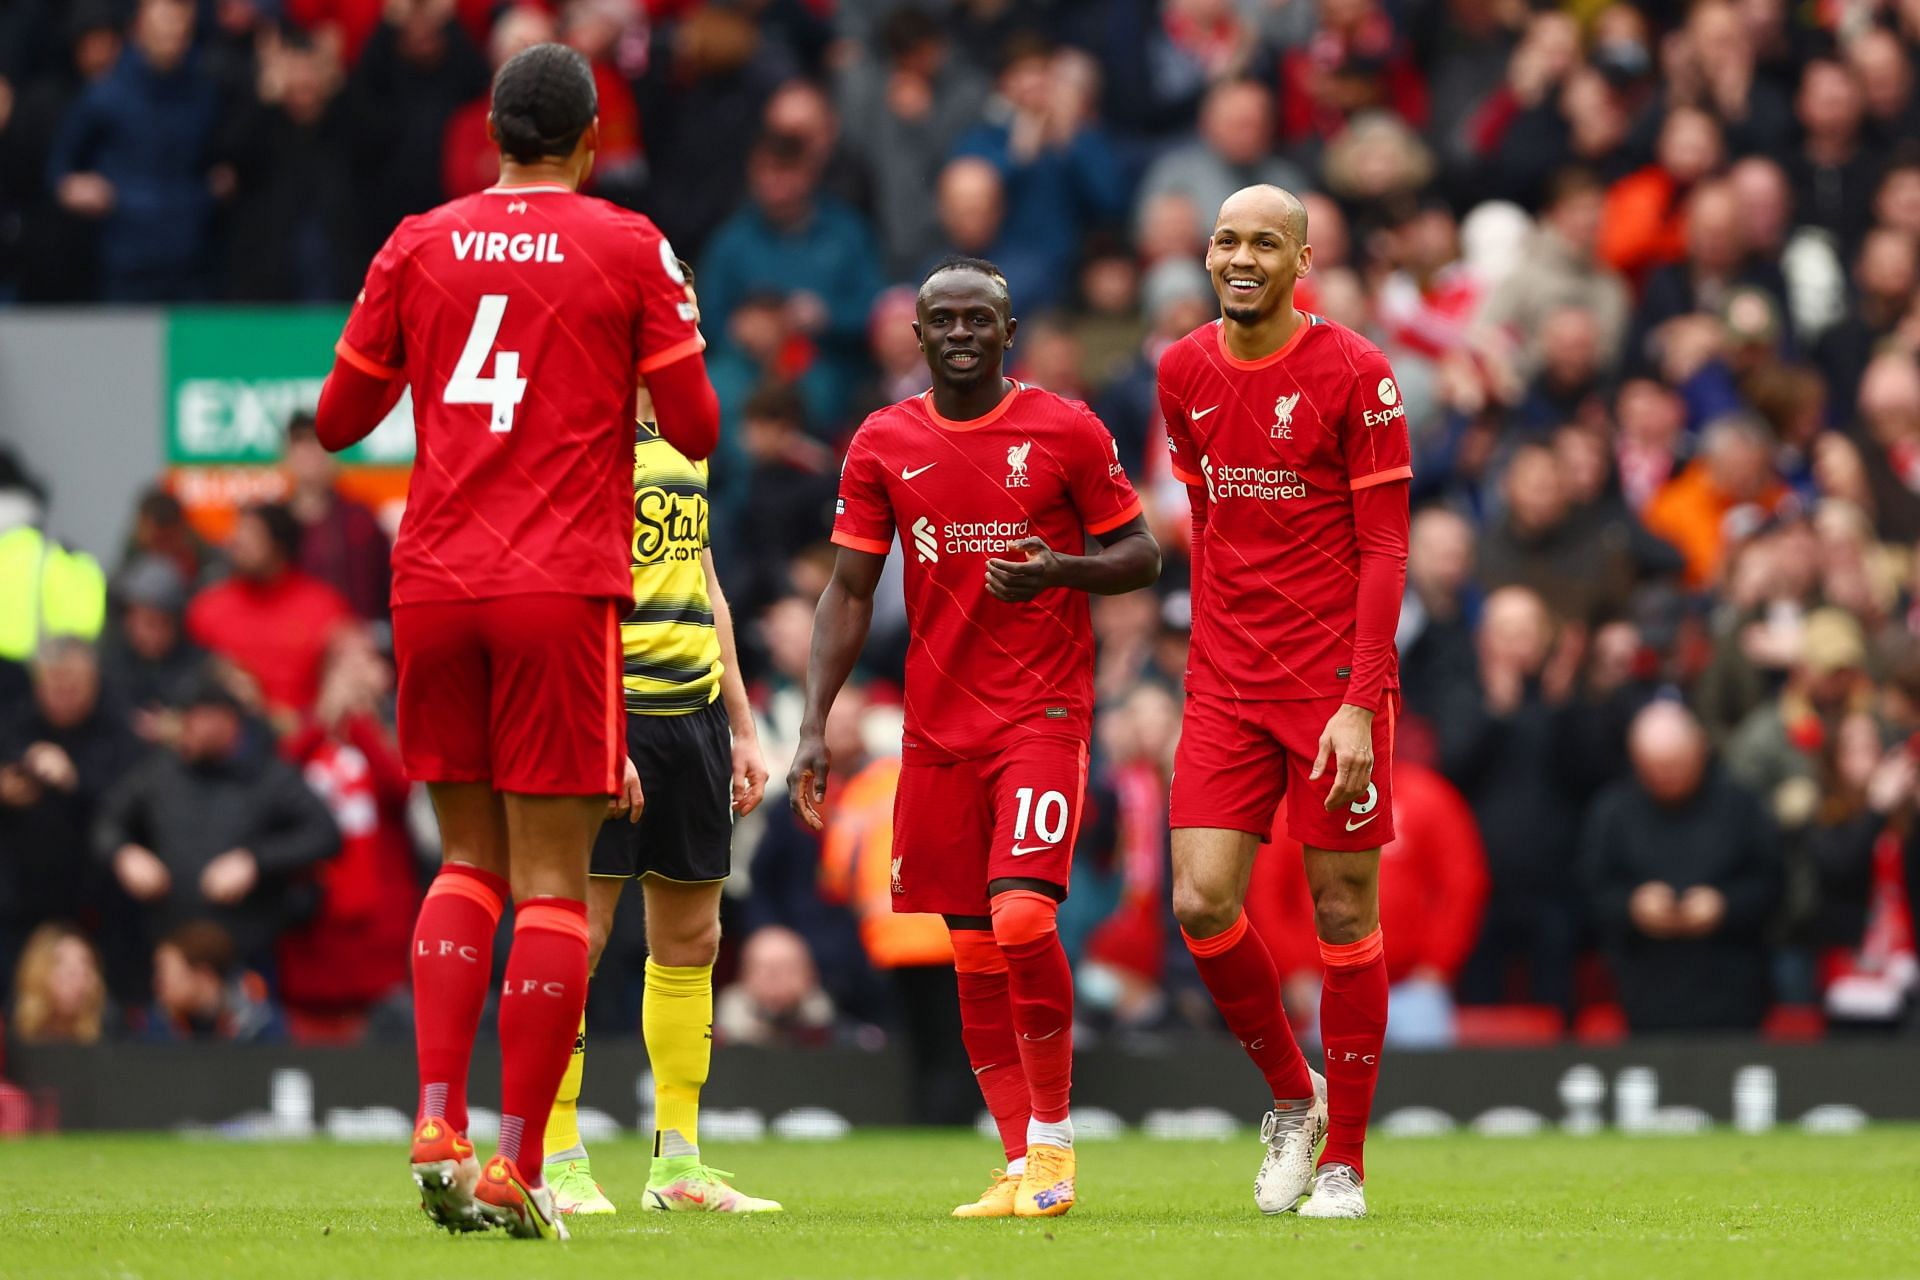 5 reasons why Liverpool will win against Manchester City tonight